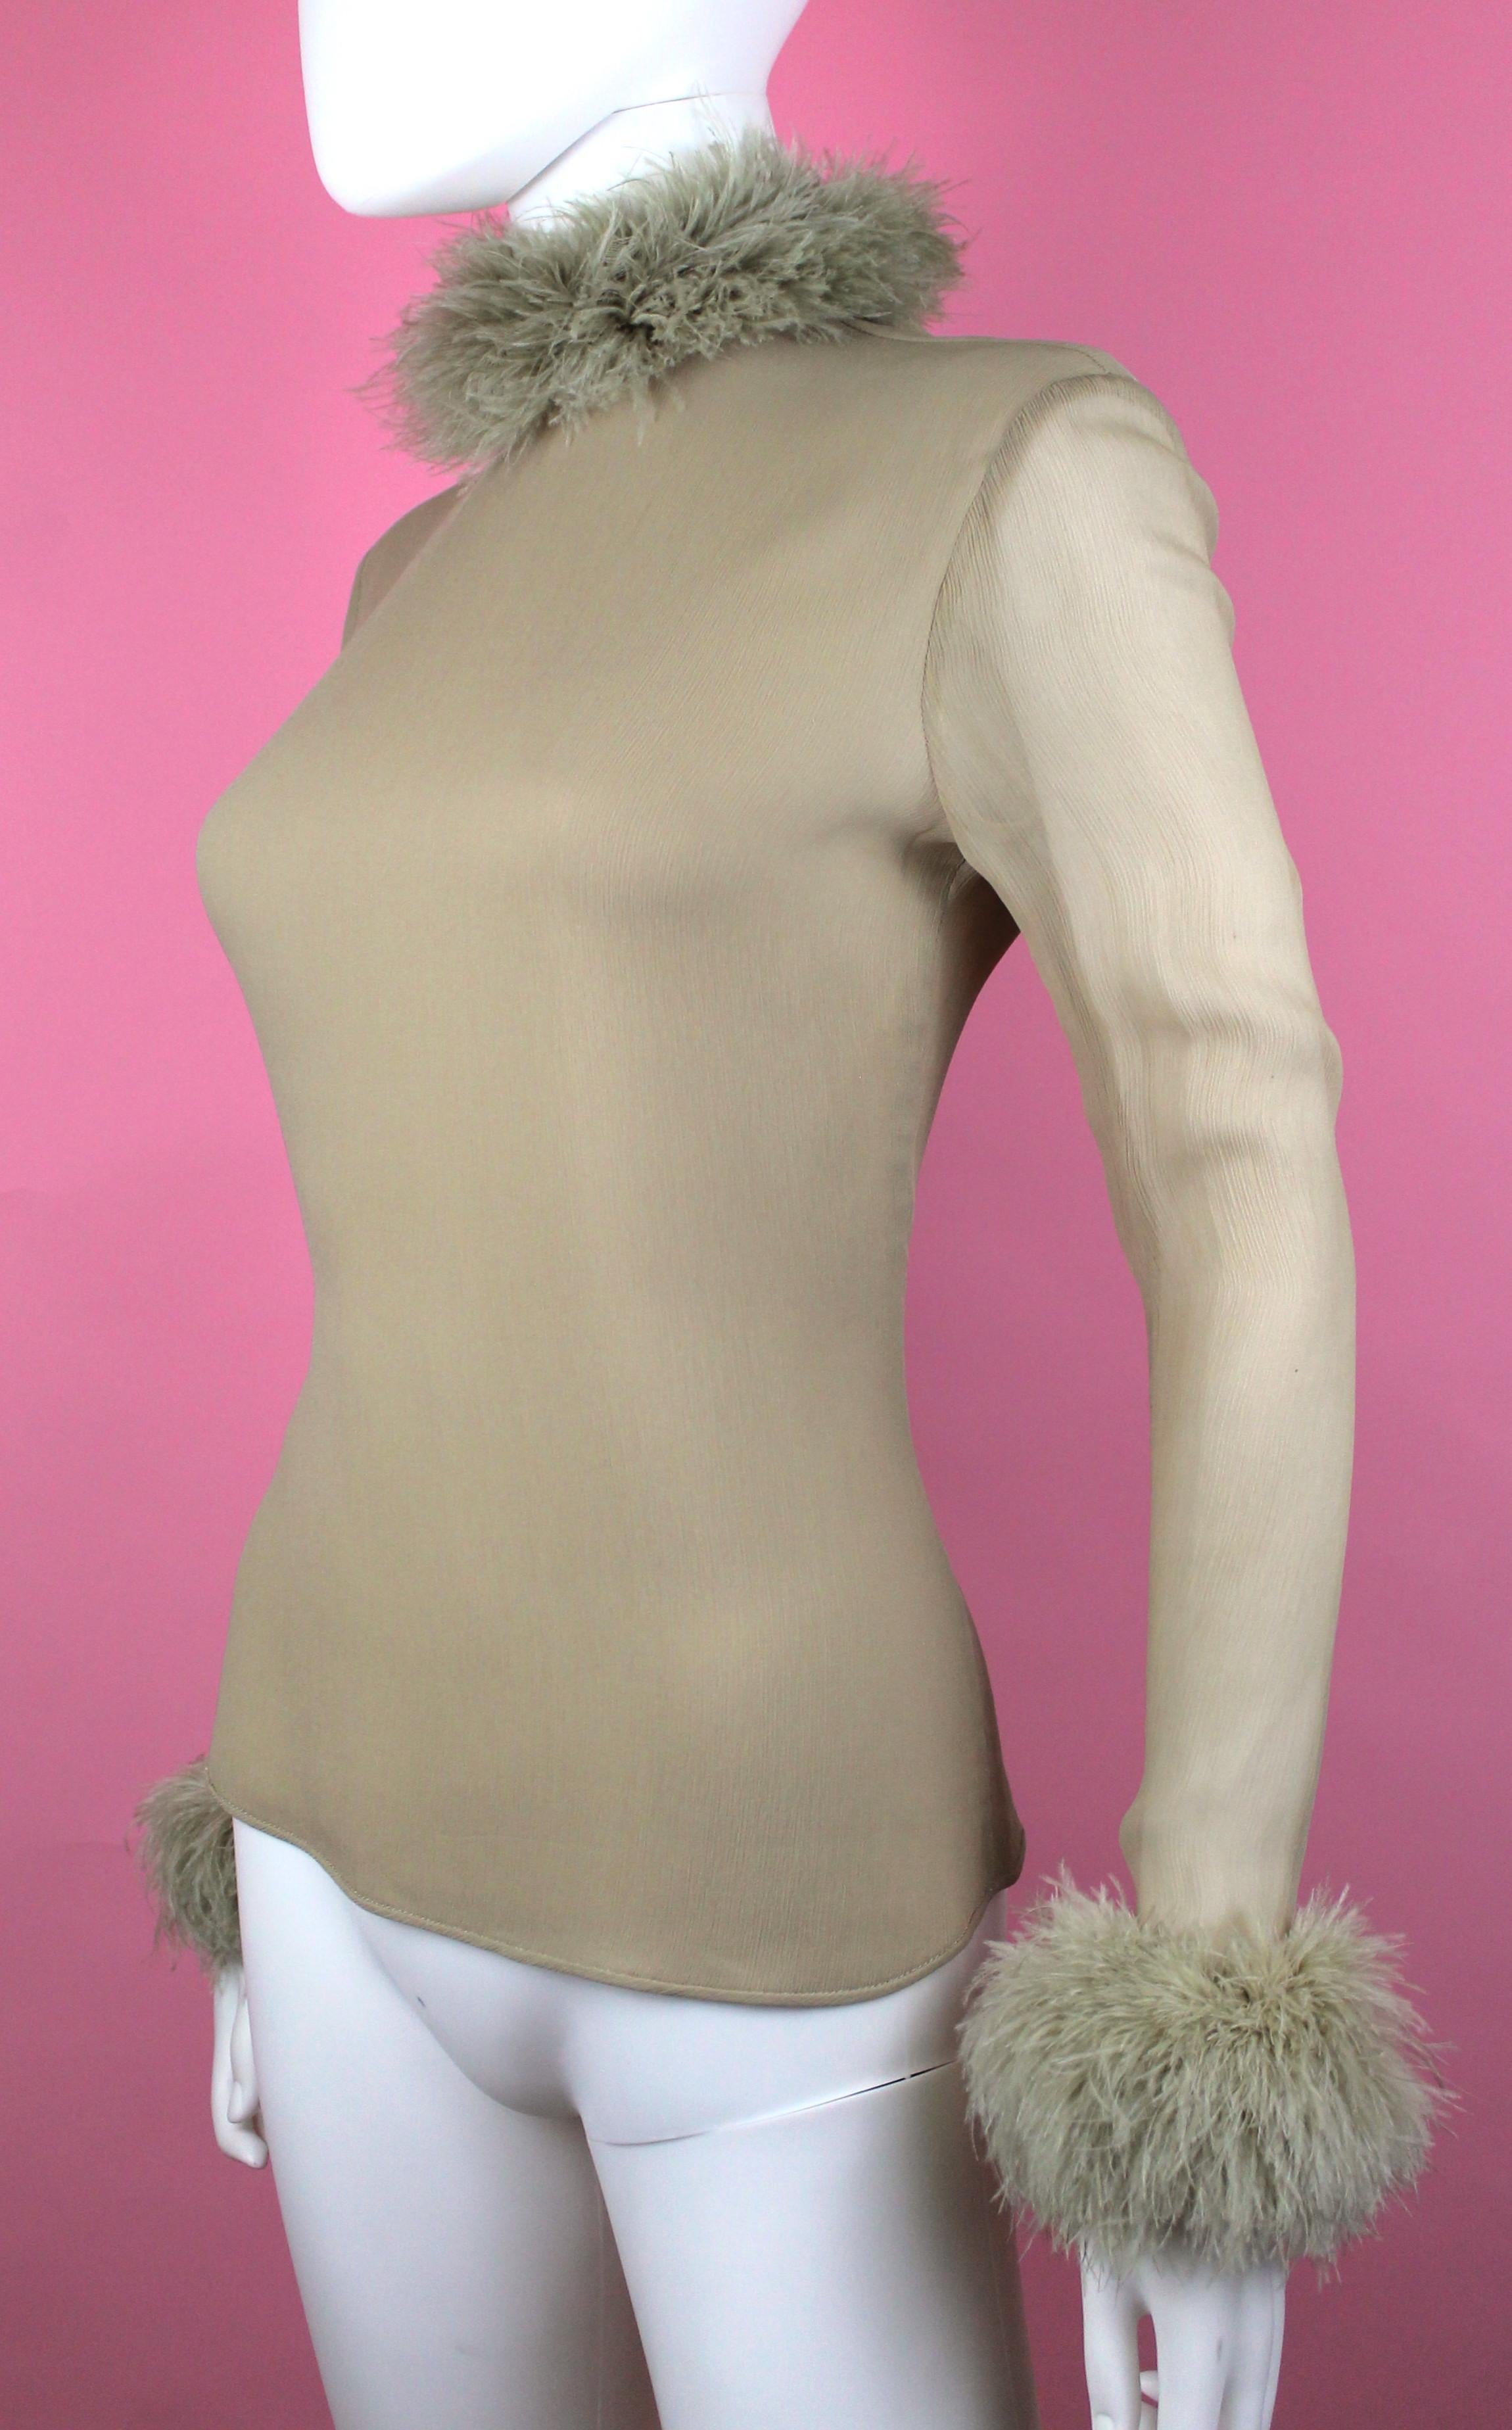 -Valentino Boutique blouse from the 90's
-Made of sheer beige/nude silk and ostrich trim at collar and cuff
-Zips from the back
-Cuffs also zip 
-Please note to carefully and slowly zip up garment as it is very delicate silk fabric
-Made in Italy